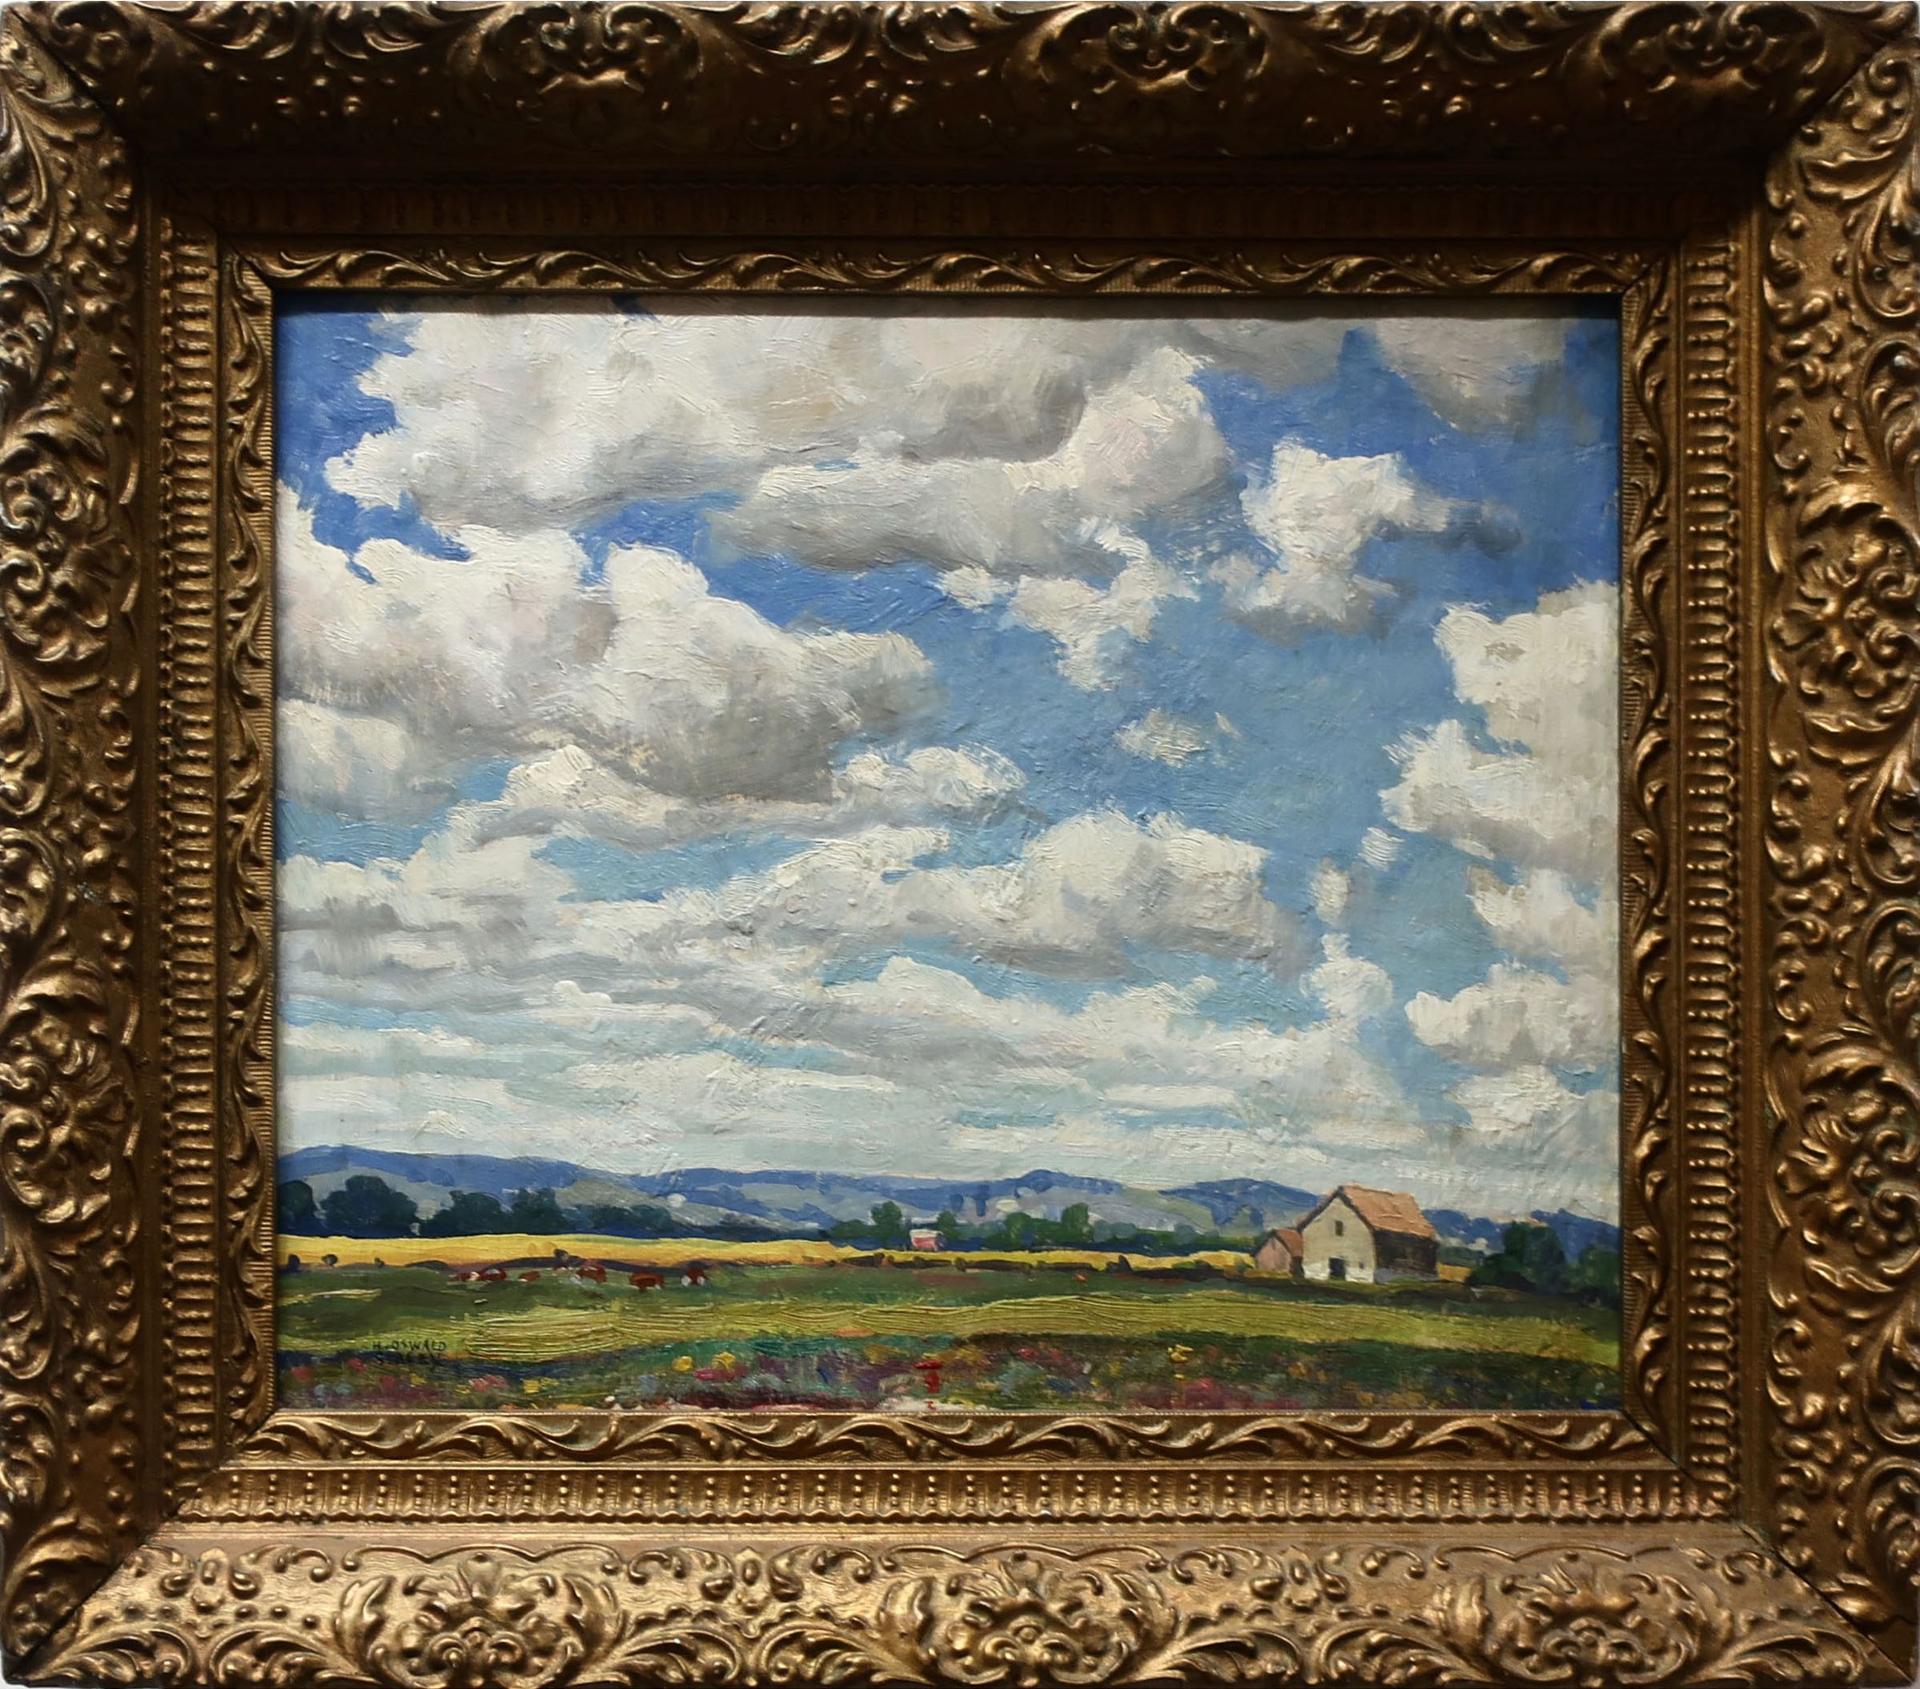 Harold Oswald Stacey (1909-1968) - Farmscape Under Cloudy Sky